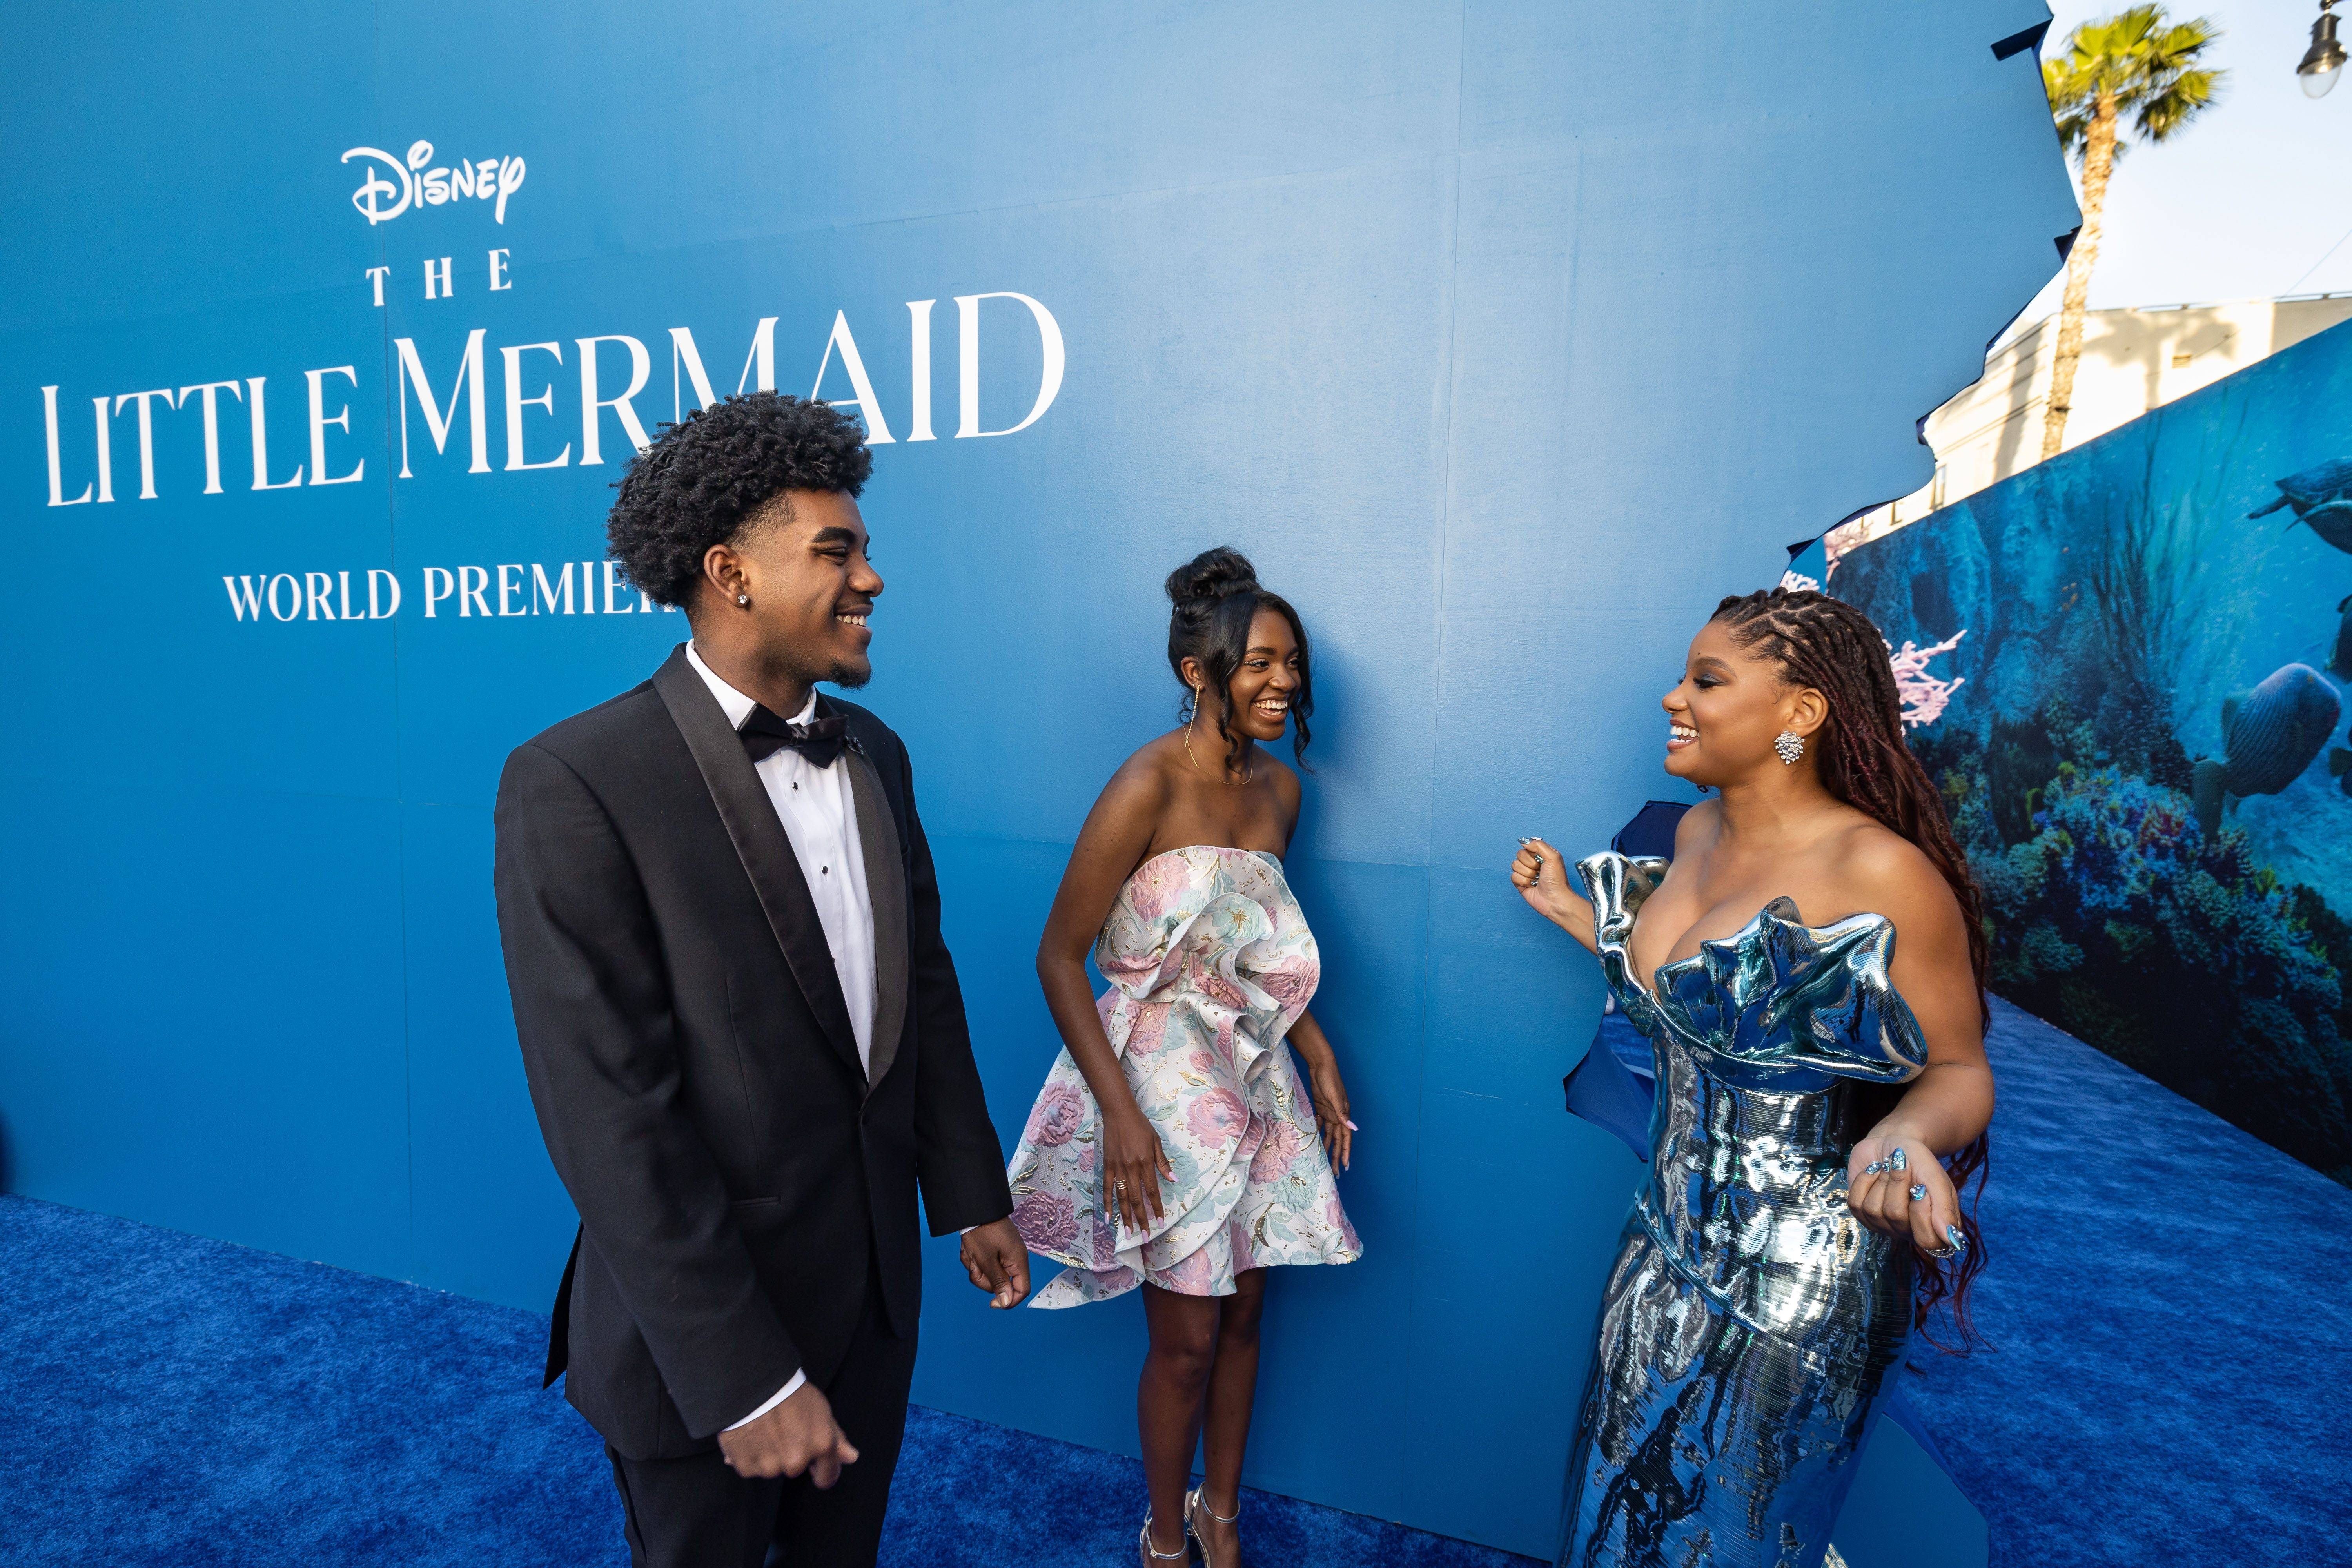 Disney Dreamers Attend 'The Little Mermaid' World Premiere with singer Halle Bailey